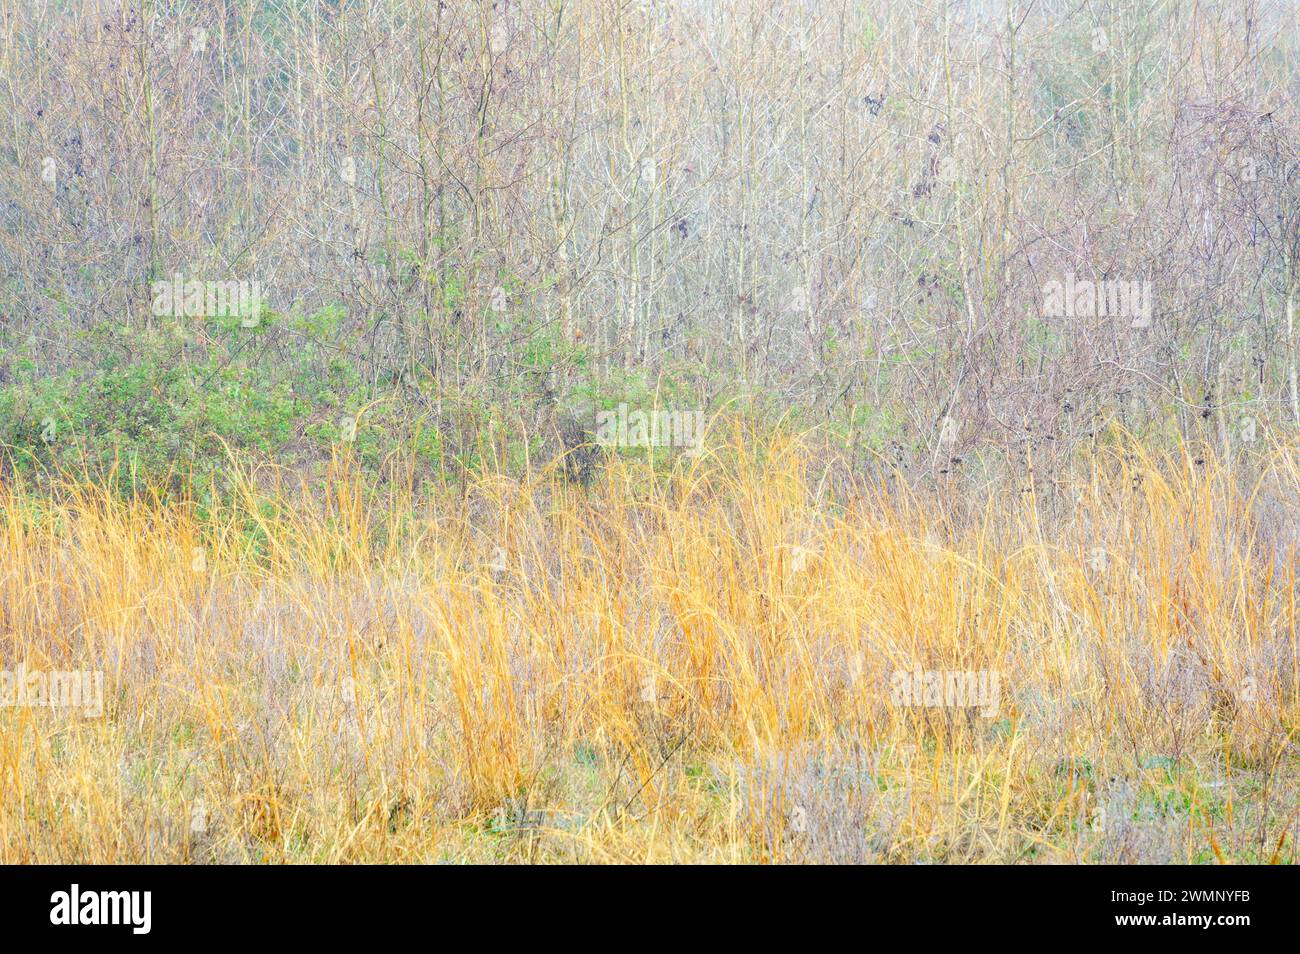 Abstract image colorful prairie grass and twigs, Paynes Prairie Preserve State Park, Florida, USA. Stock Photo